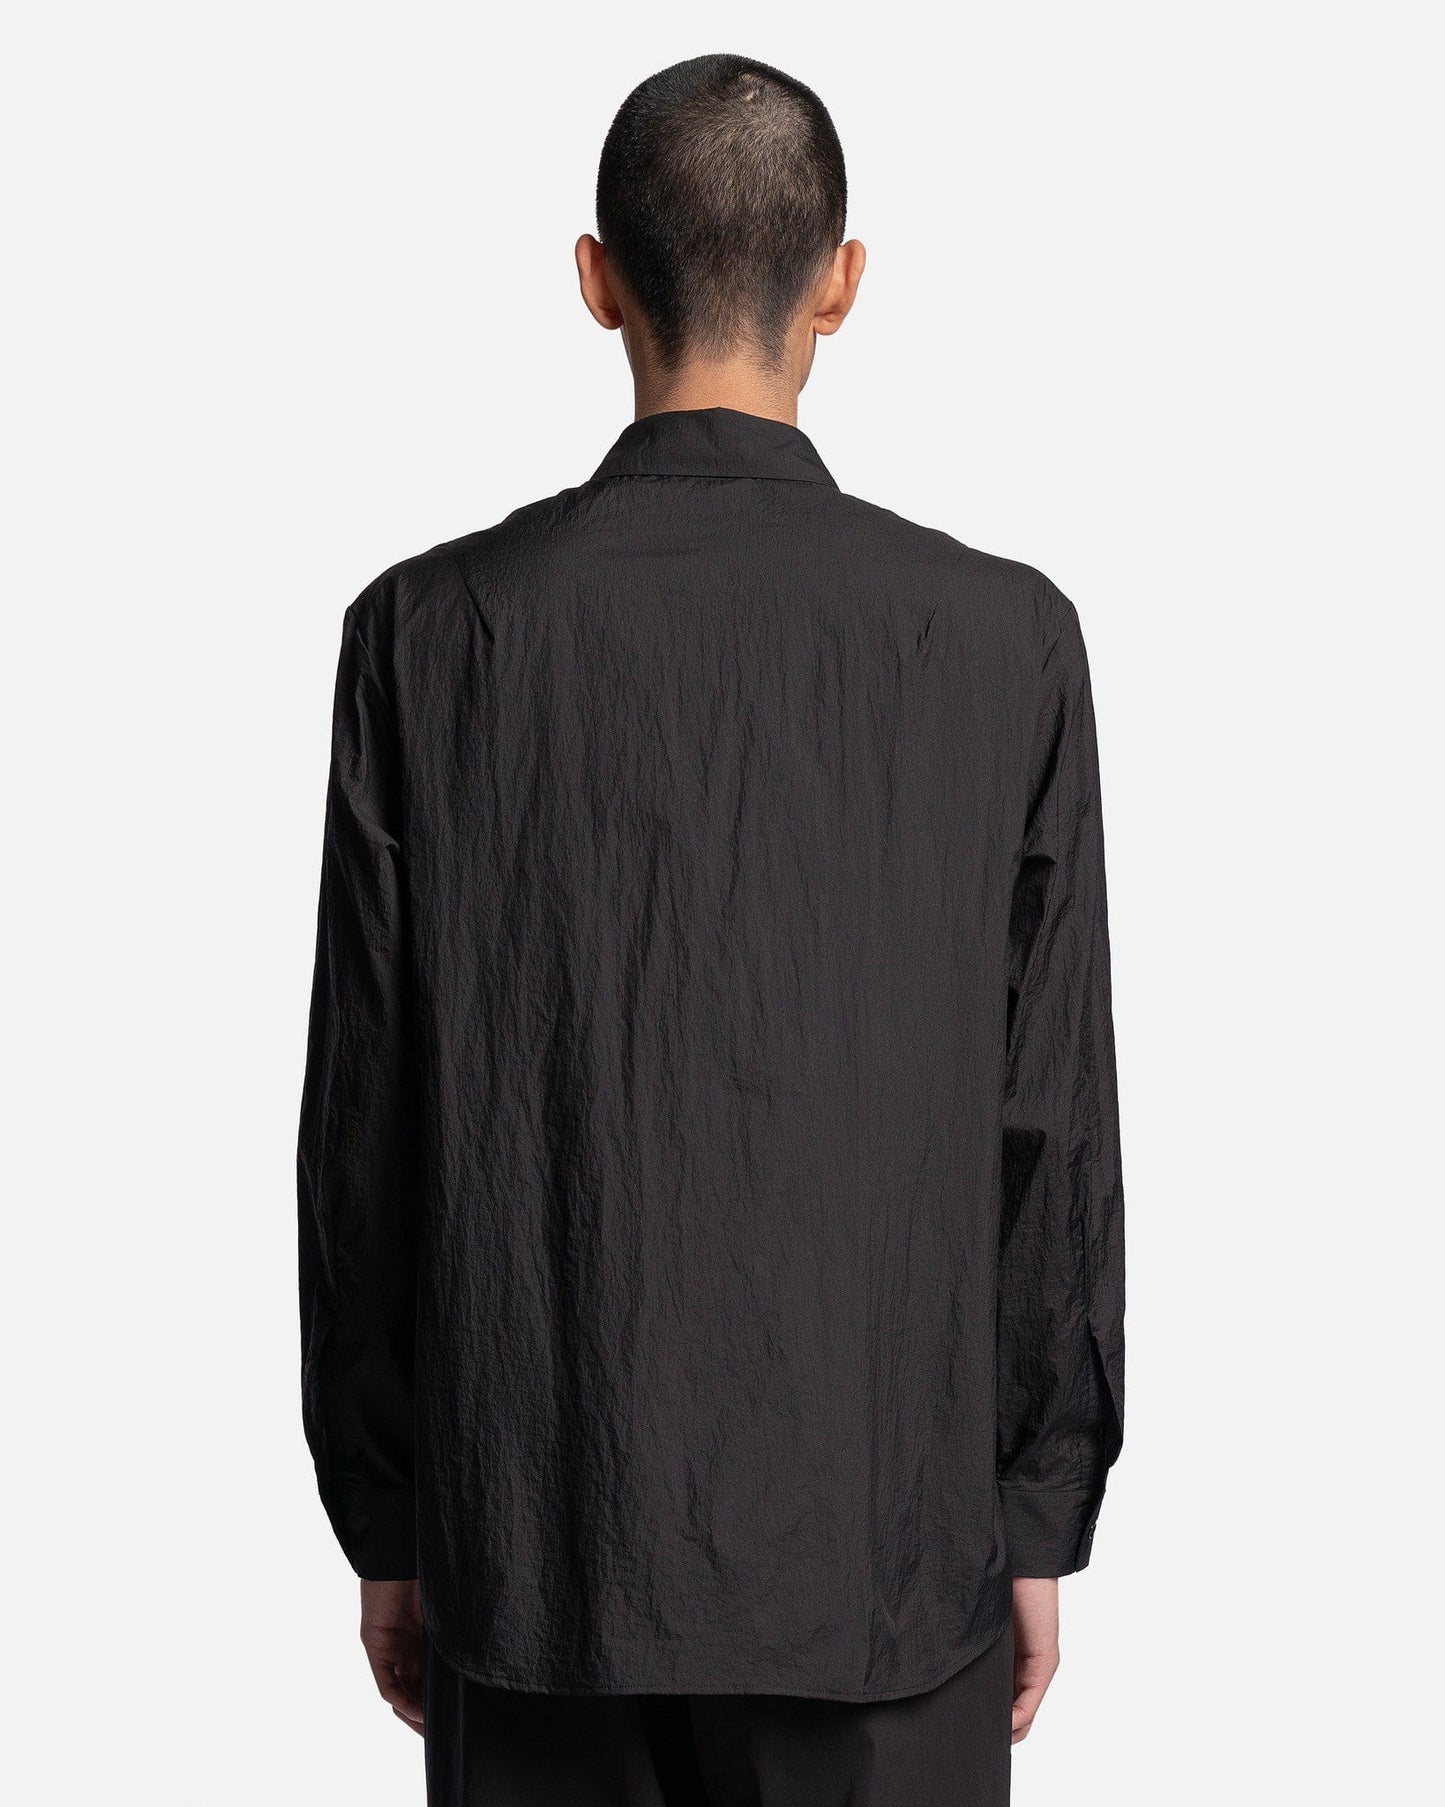 POST ARCHIVE FACTION (P.A.F) Men's Shirts 5.0+ Shirt Center in Black